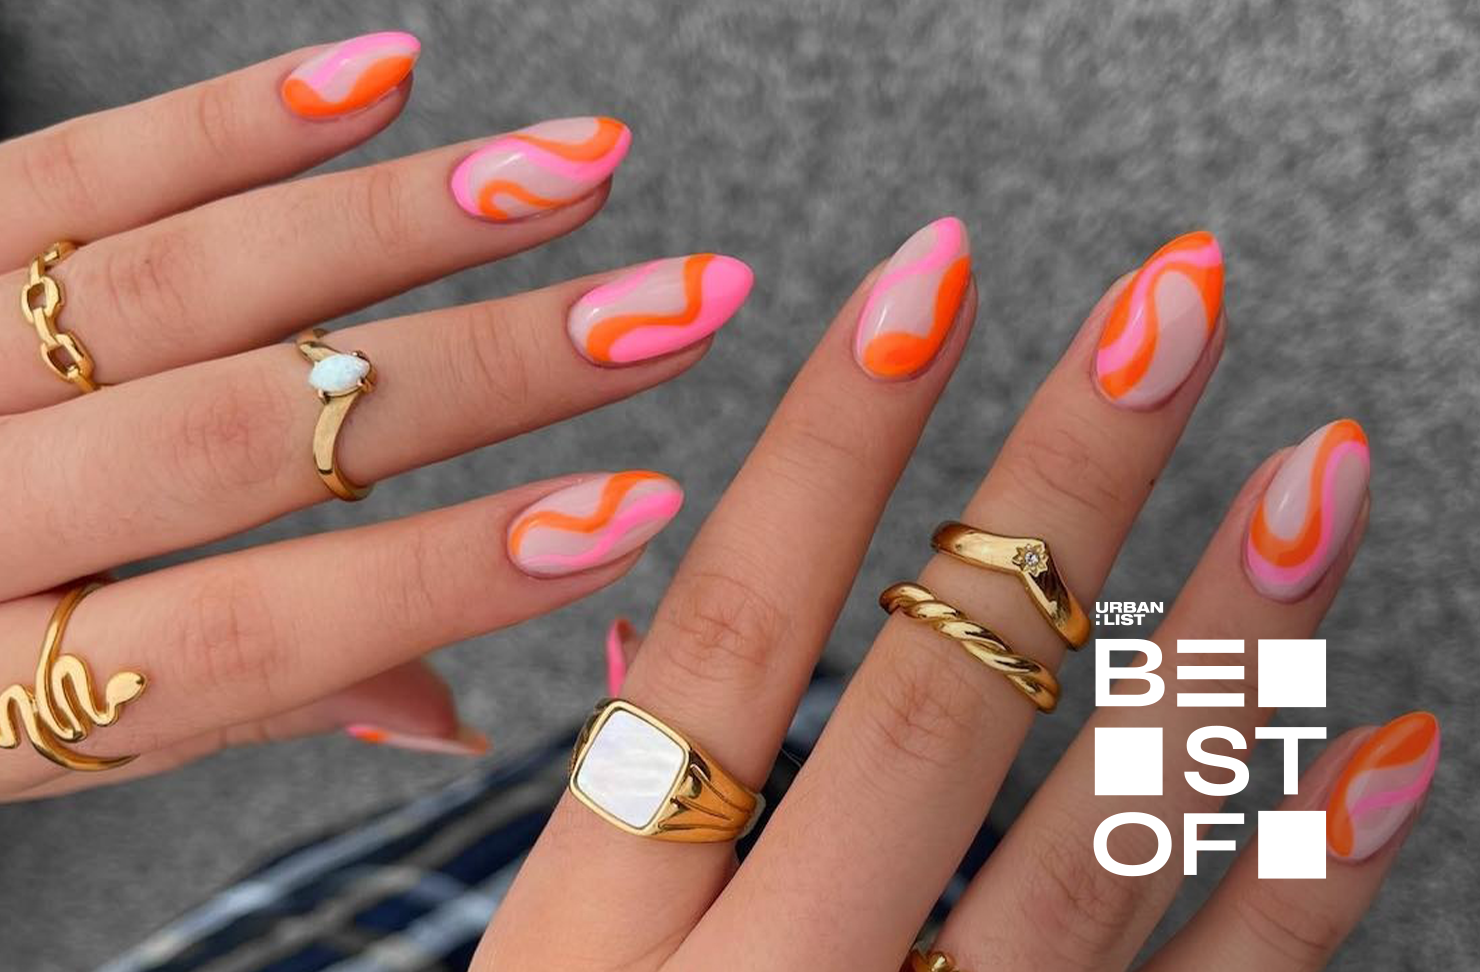 Top Nail Salons Near You on Booksy